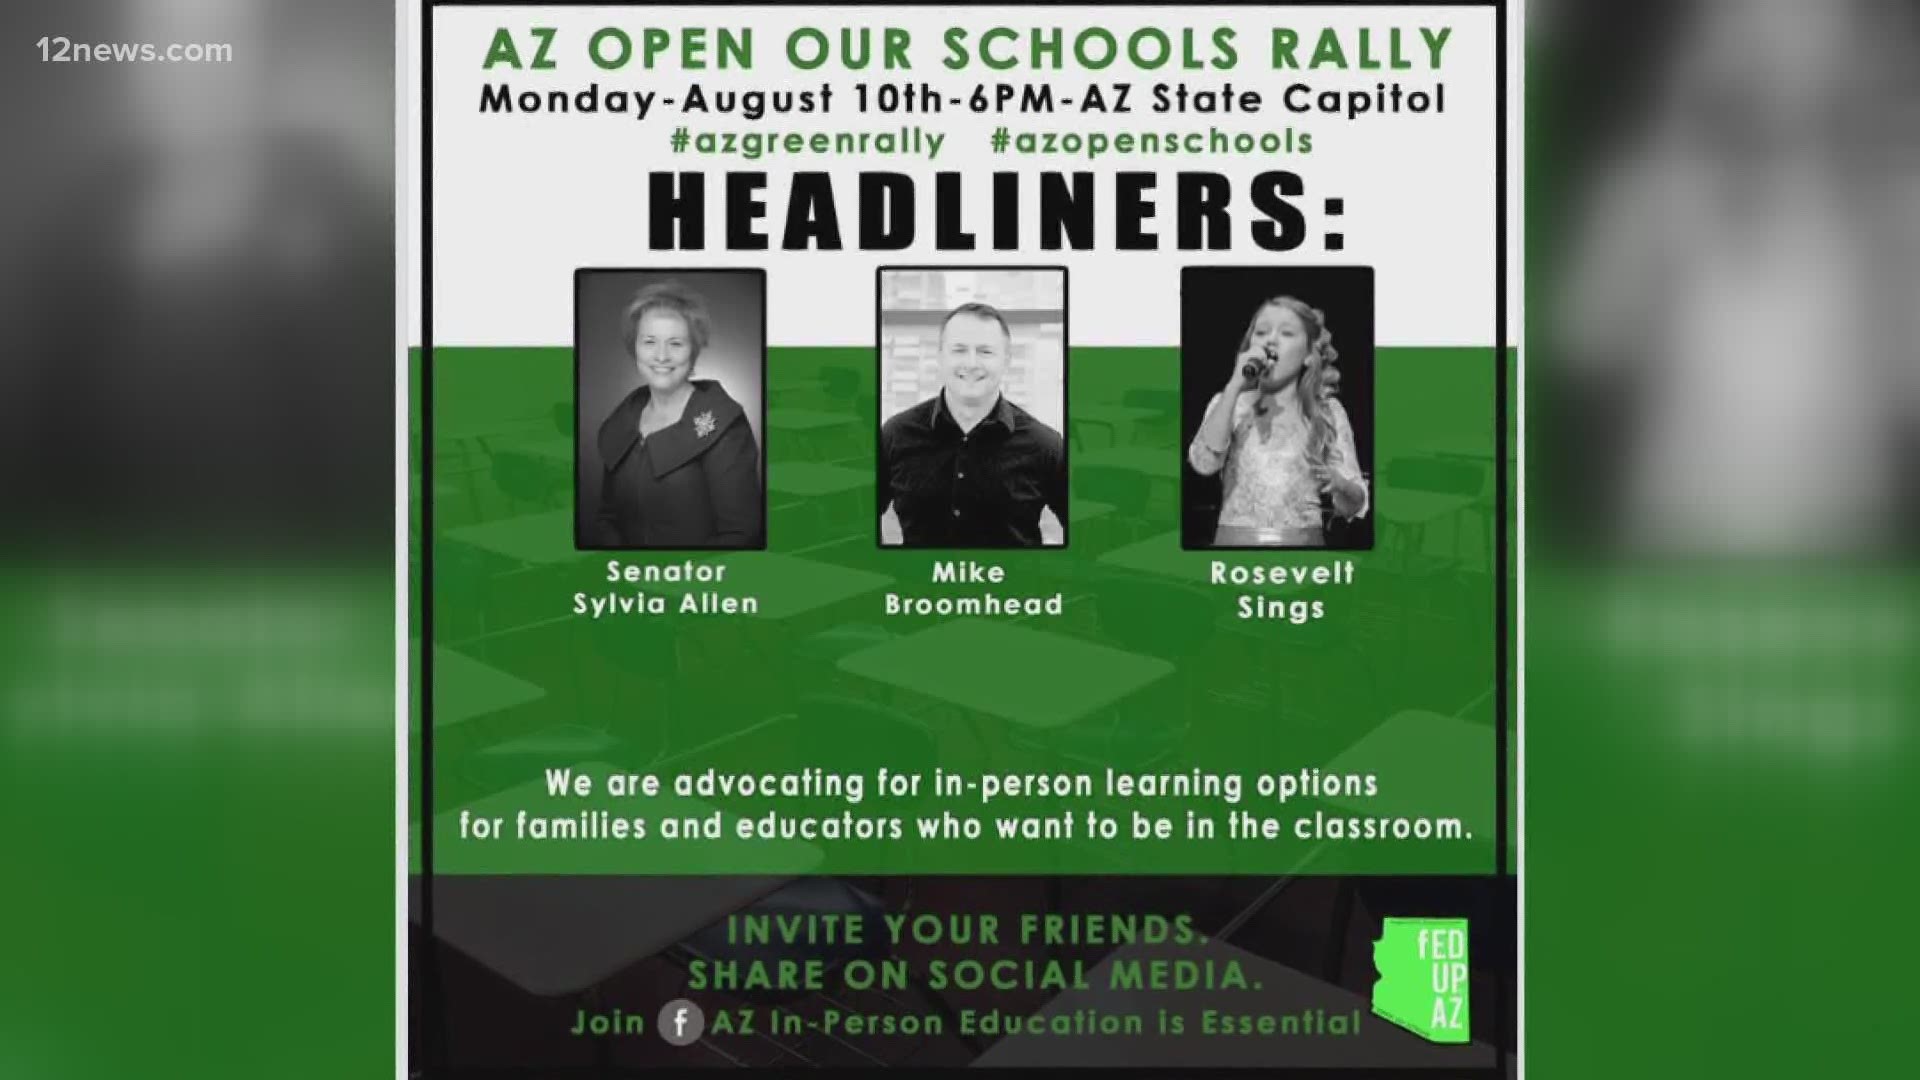 A grassroots organization is expected to hold a rally on Monday advocating for classrooms to open back up across Arizona. Team 12's Jen Wahl has the latest.